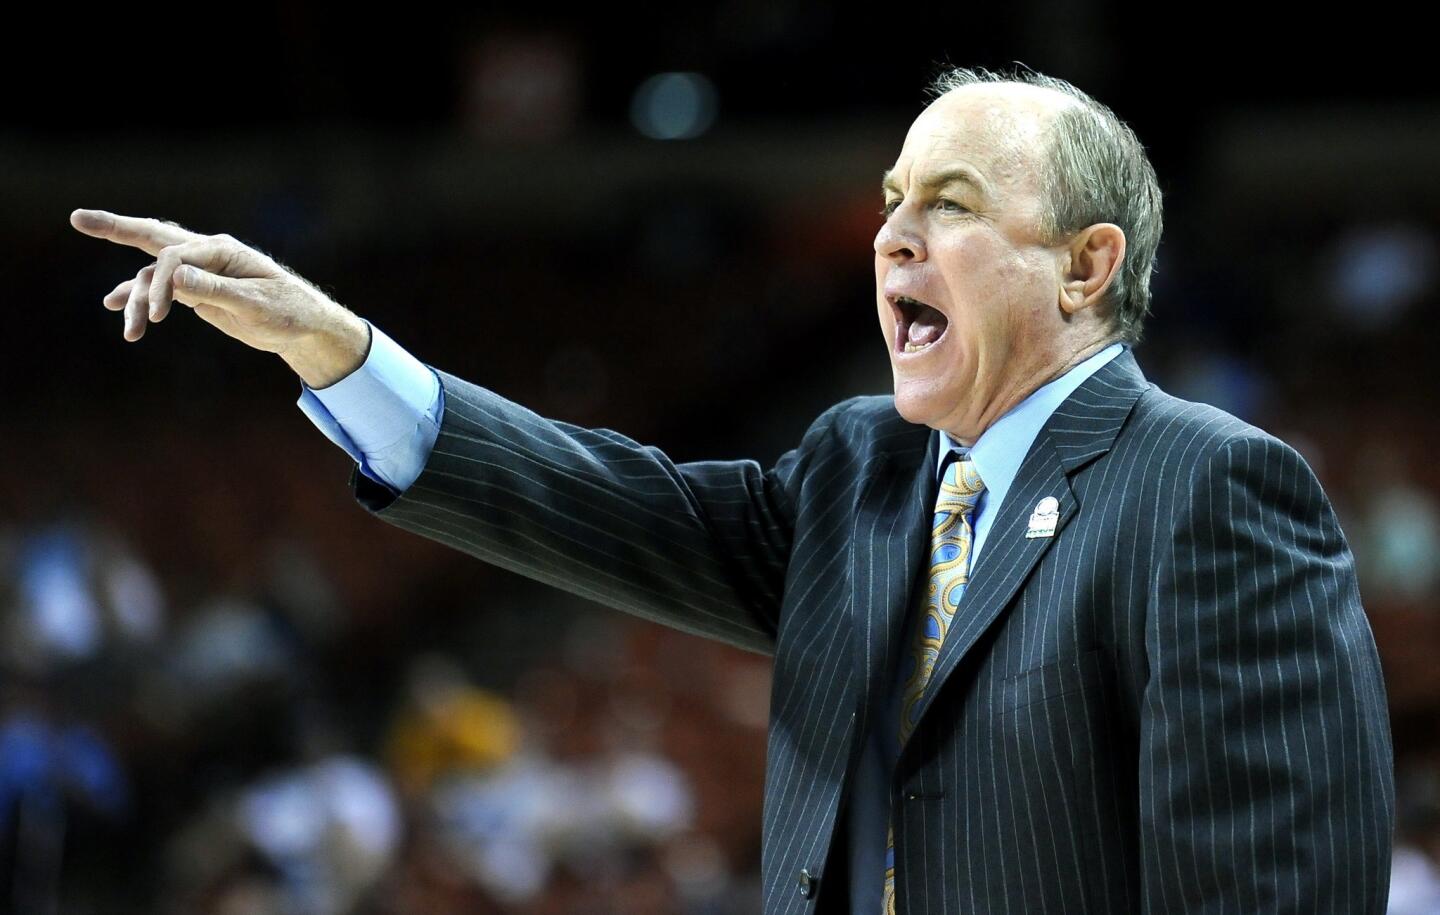 UCLA Coach Ben Howland shouts instructions during the team's game against Minnesota in the NCAA tournament.